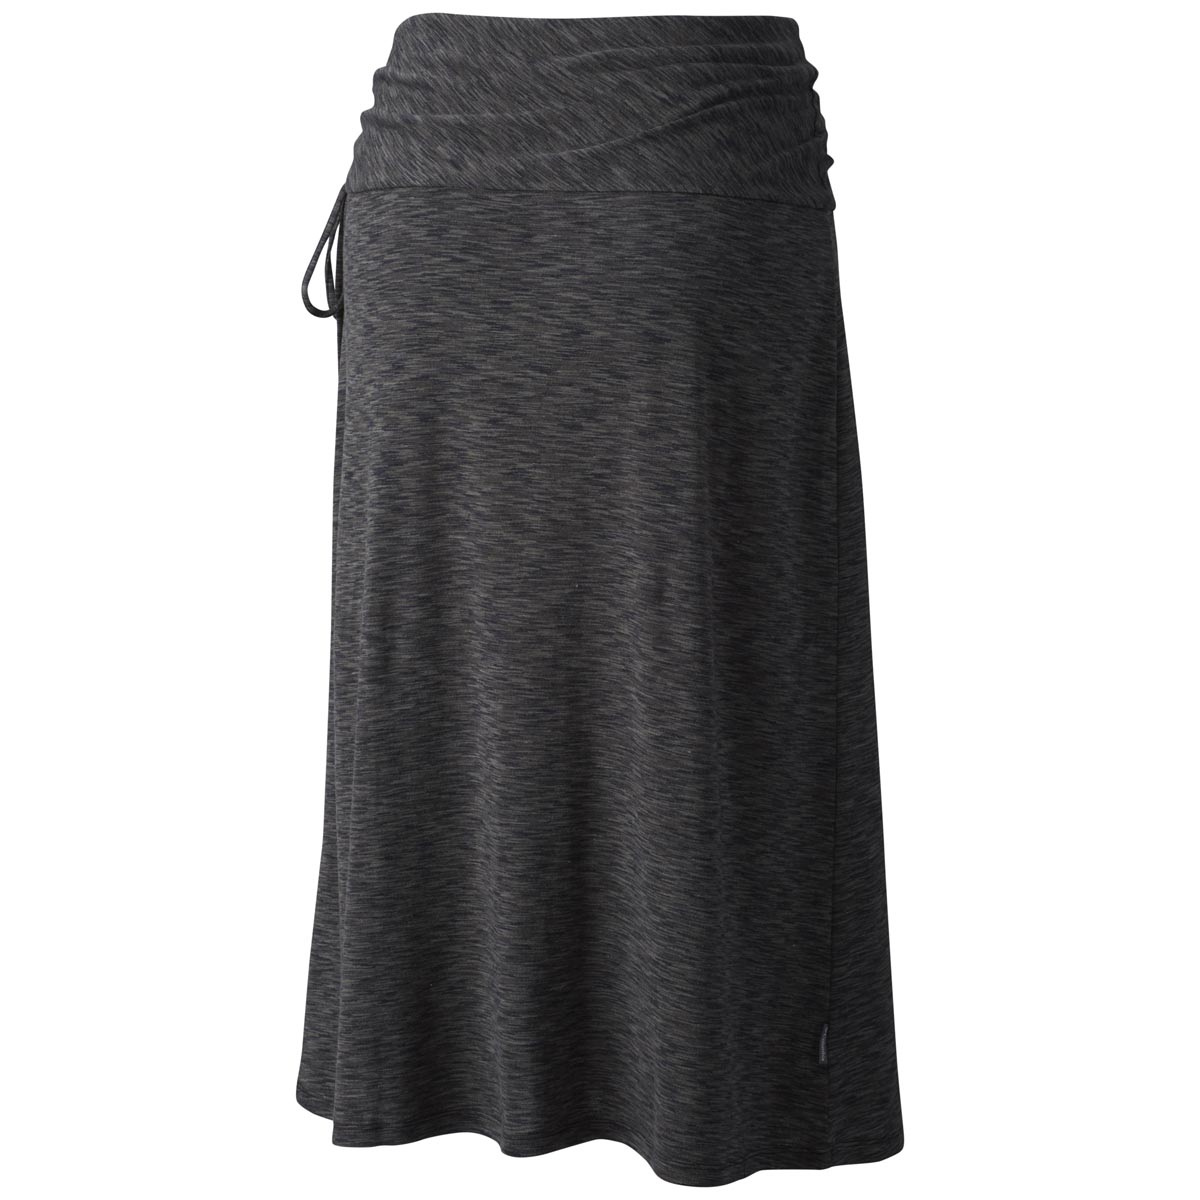 Columbia Women's OuterSpaced Skirt